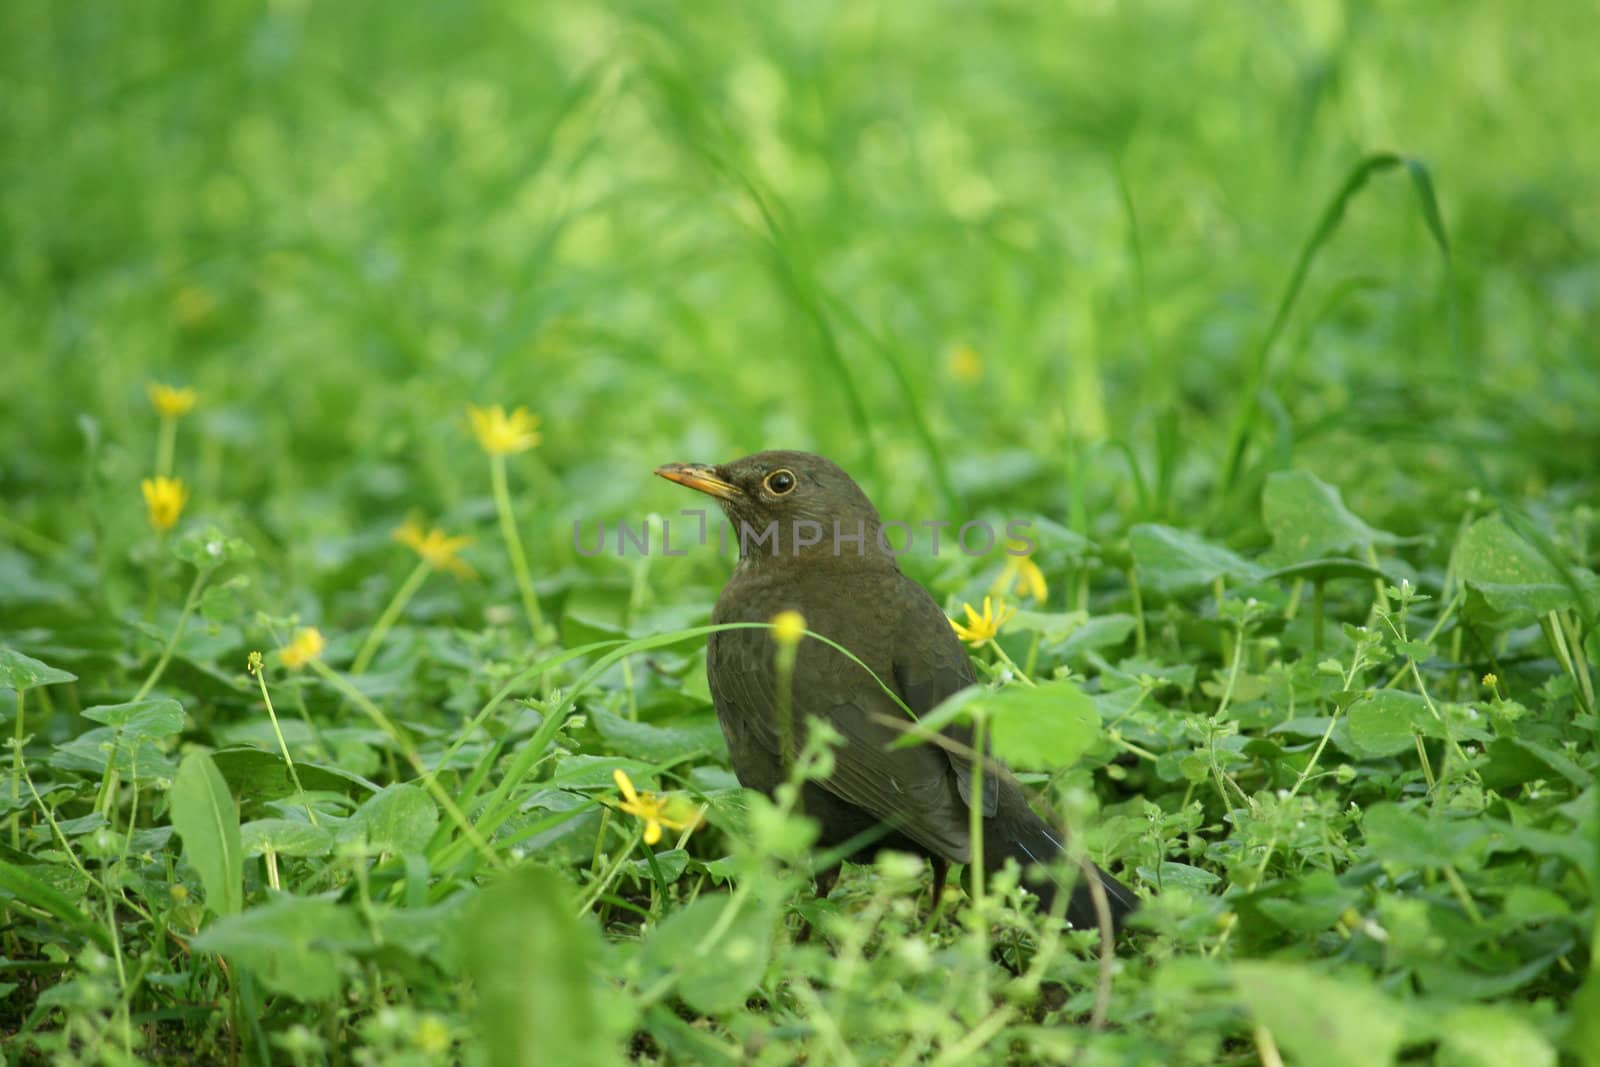 Little bird in the grass searching for food